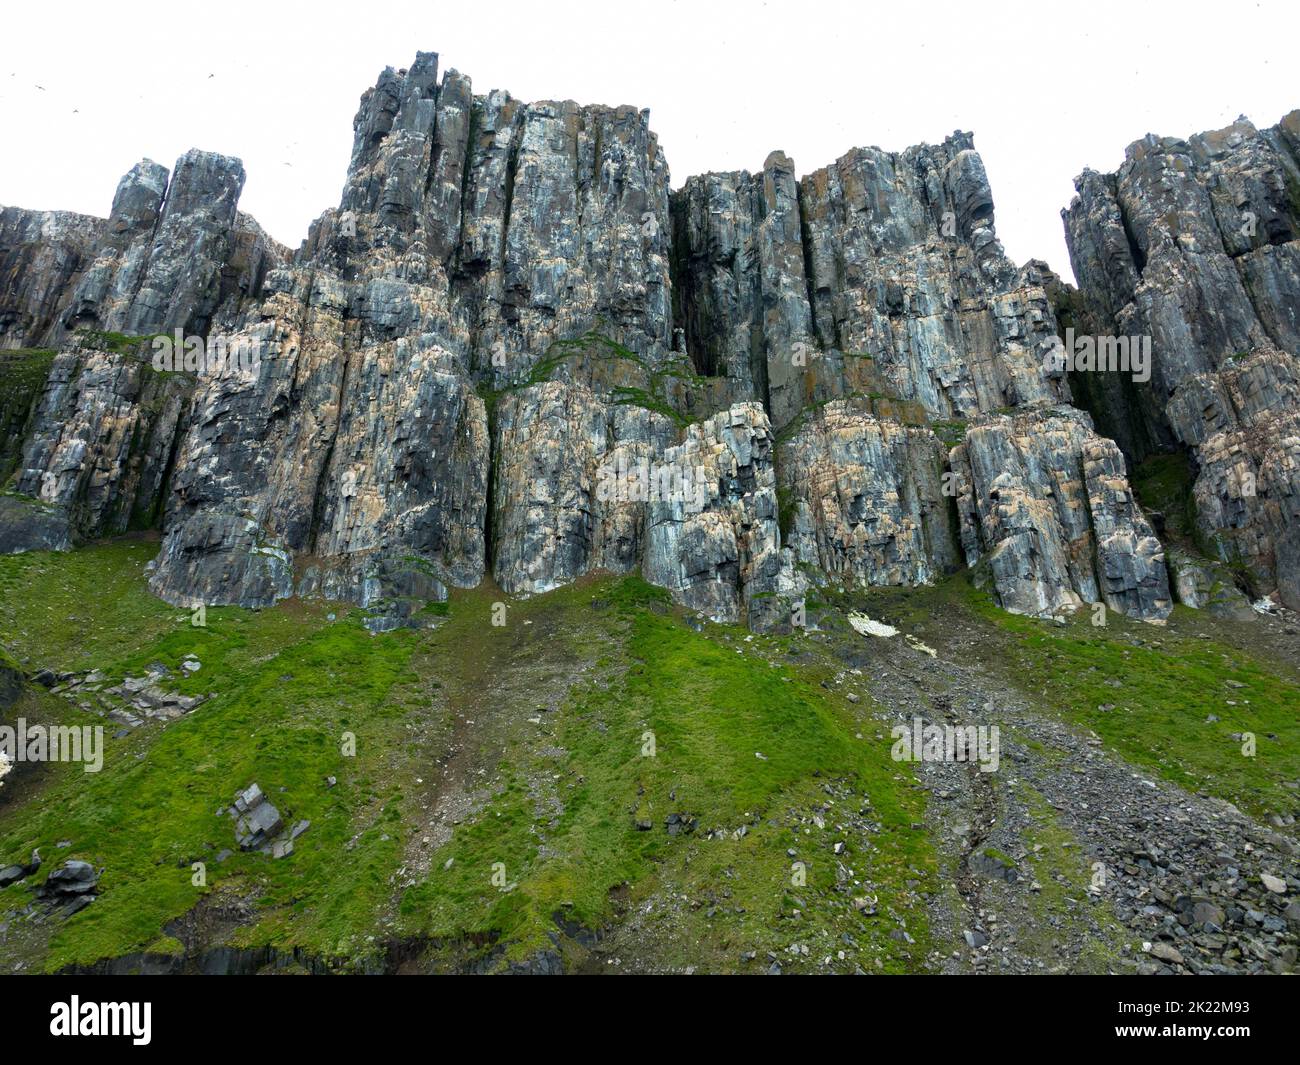 Alkefjellet is the most famous cliff in Spitsbergen archipelago. It is a bird cliff overlooking Hinlopen Fjord. Bizarre rock formation. Svalbard. Stock Photo